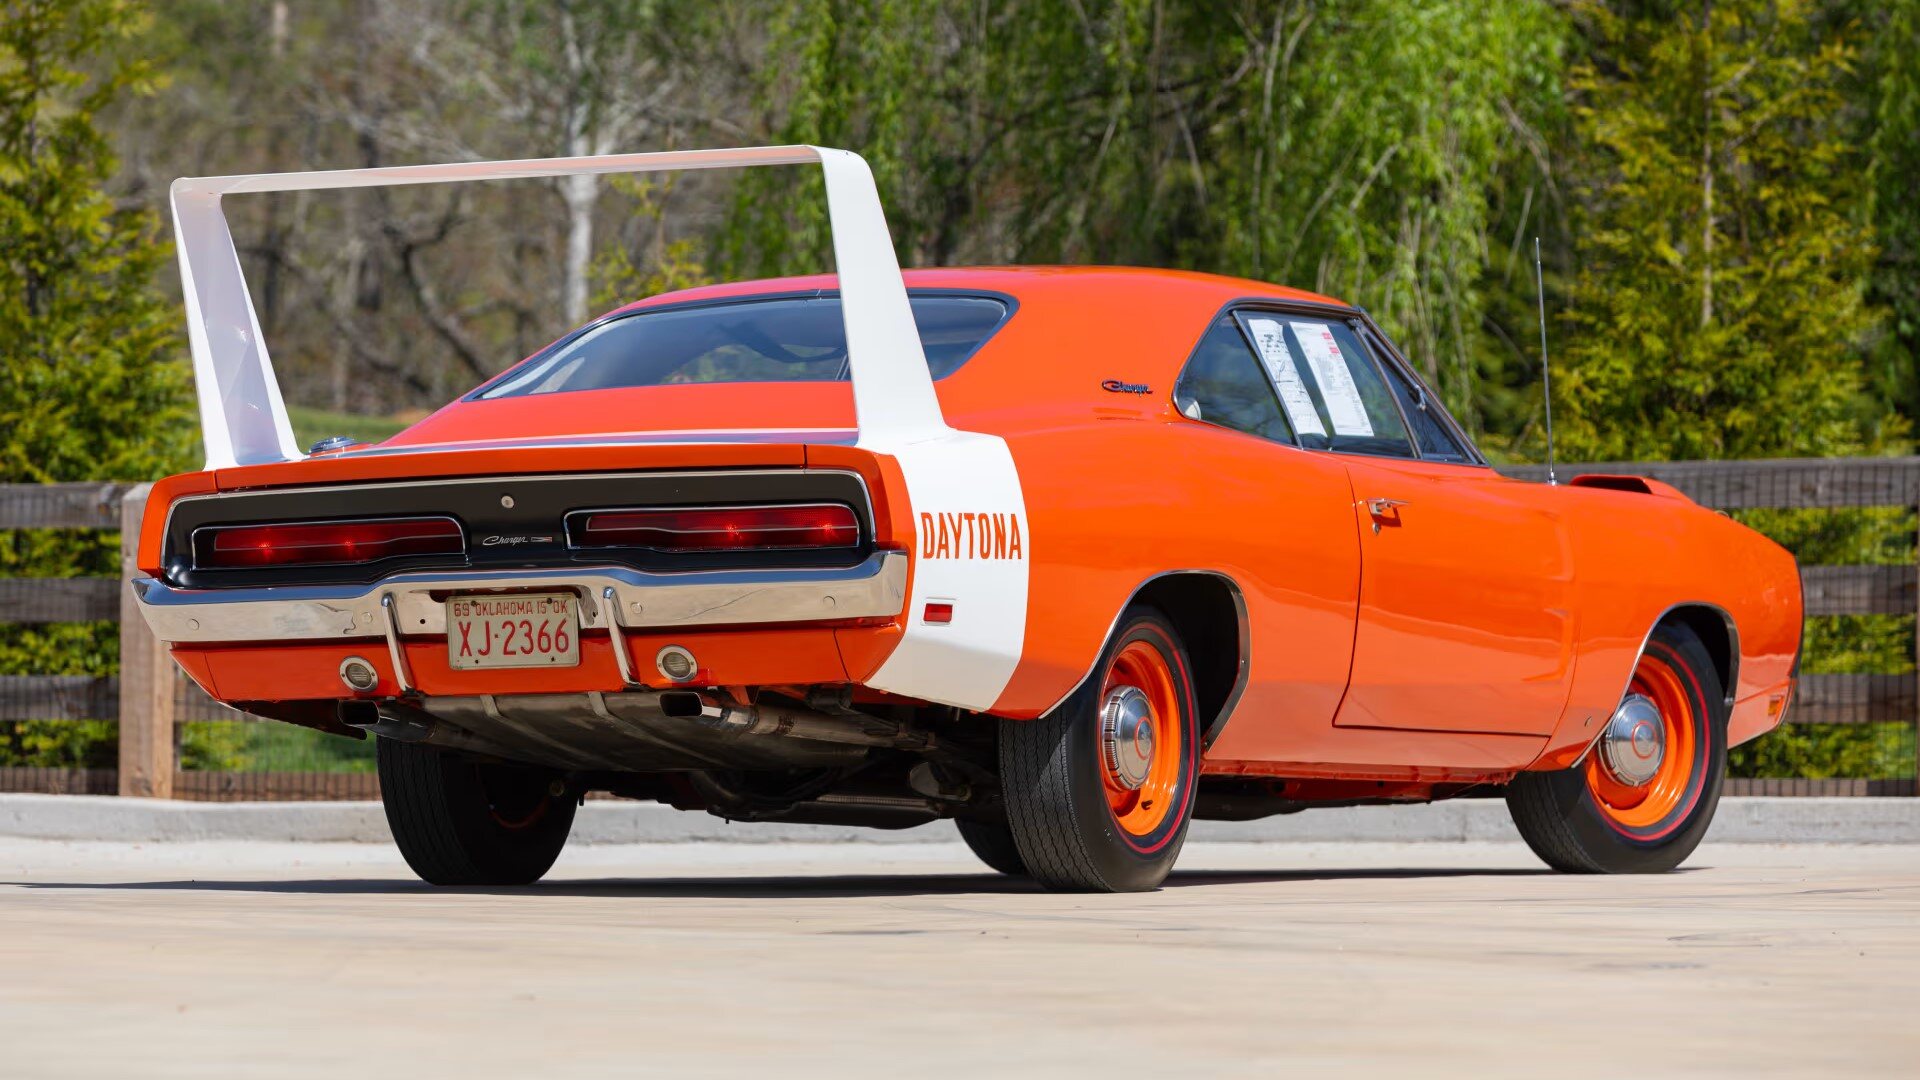 The Rear And Side Profiles Of The 1969 Dodge Charger Daytona - Exterior Shade Hemi Orange Interior White